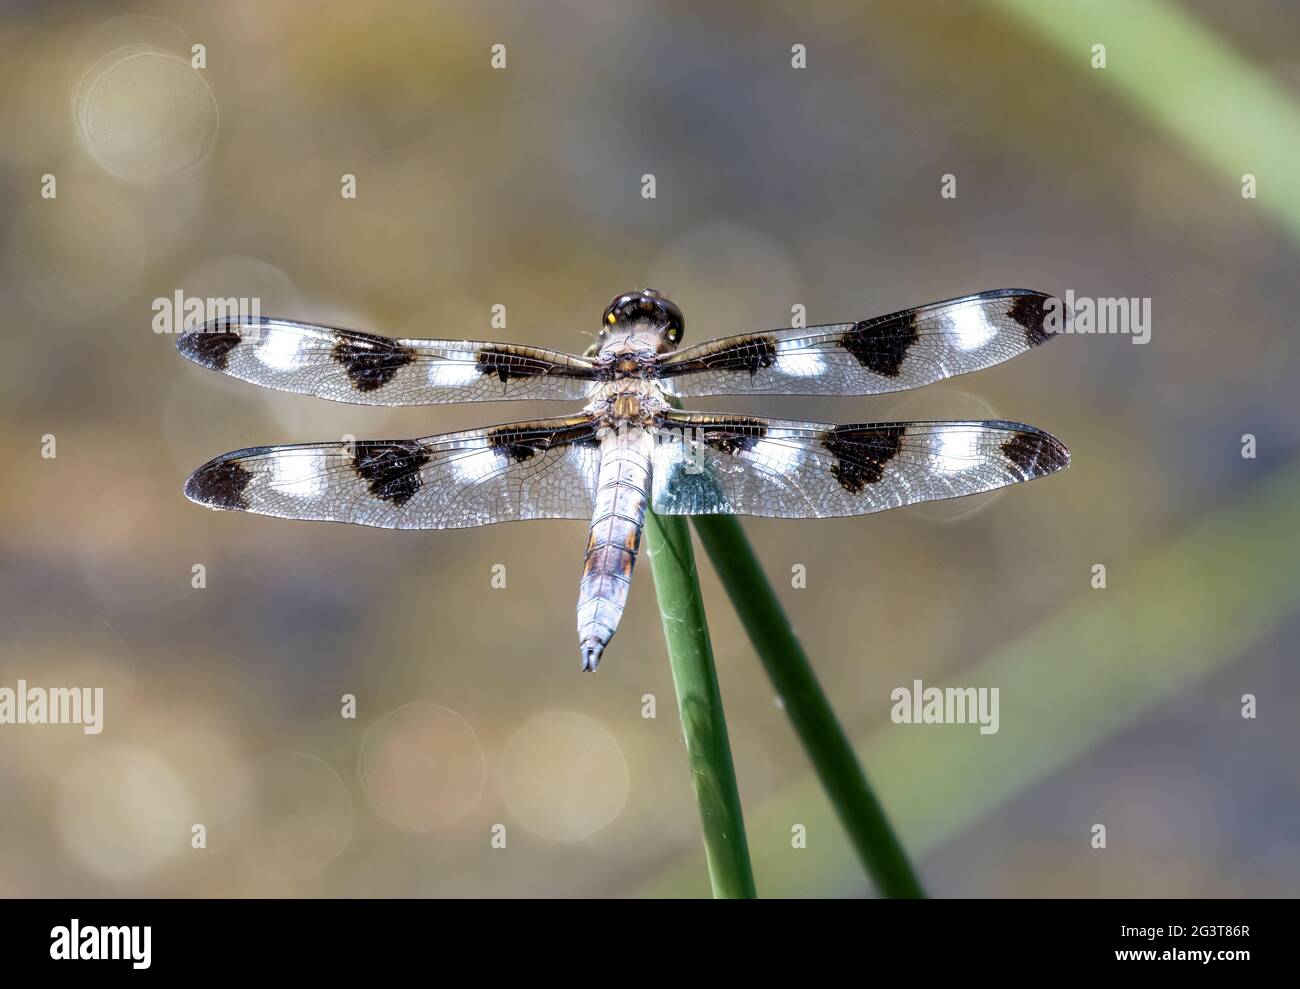 Male Twelve Spotted Skimmer Dragonfly  Libellula pulchella Stock Photo